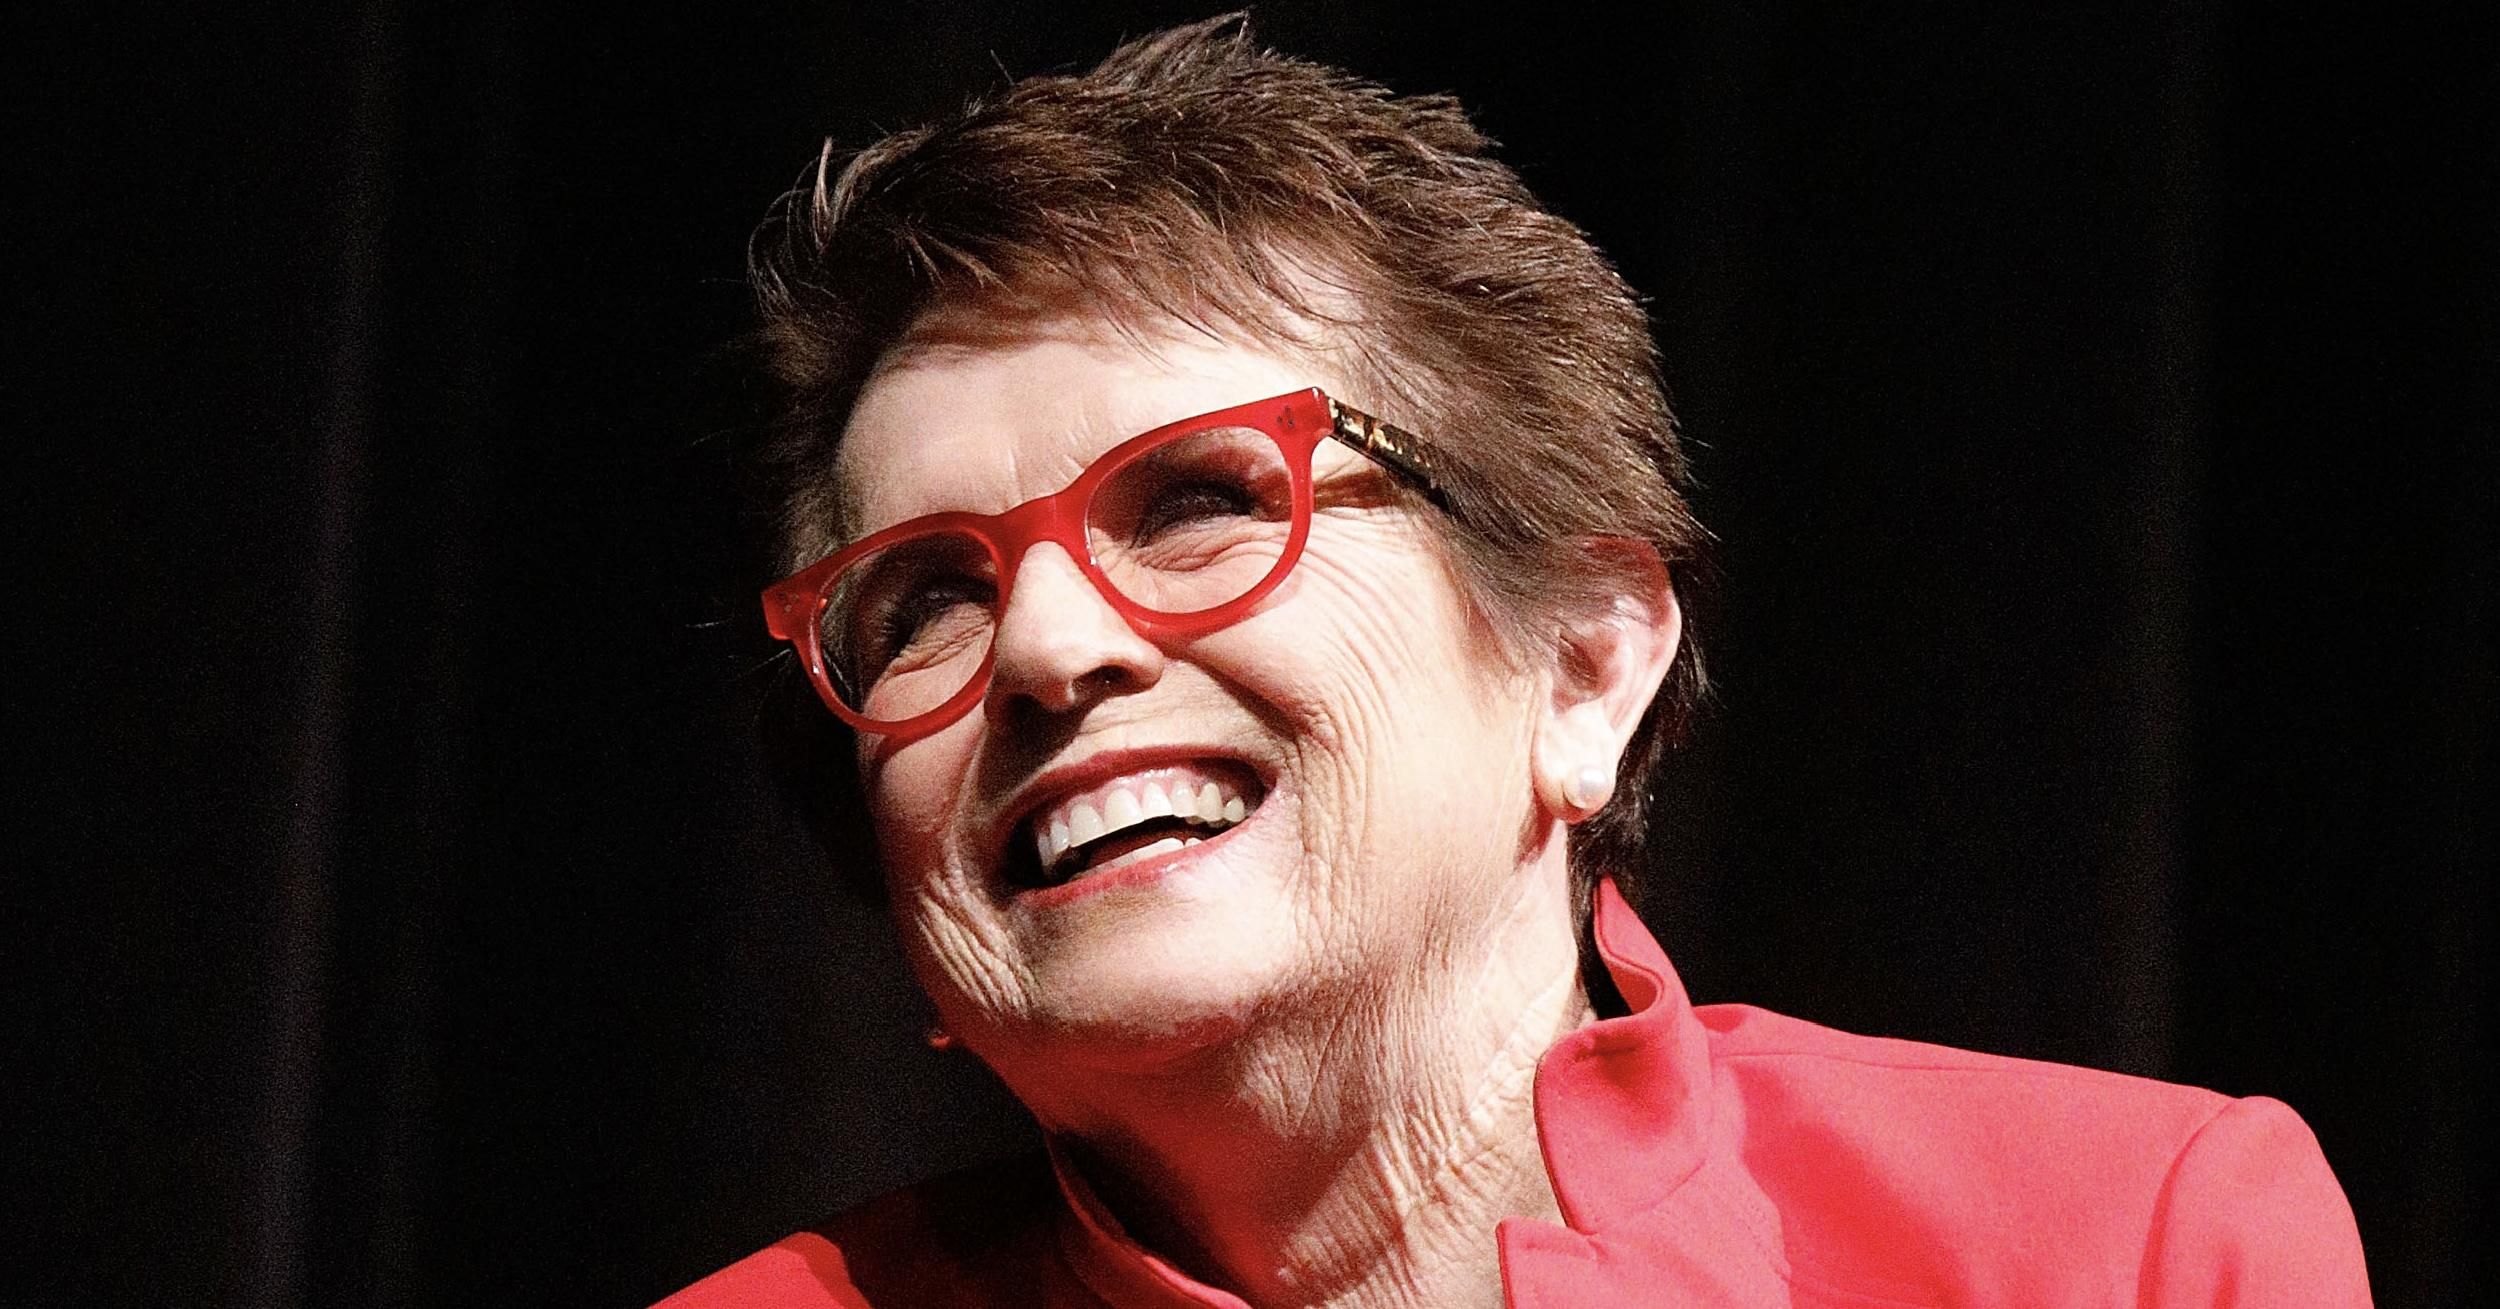 Tennis player Billie Jean King on stage during MOMA's Contenders Screening of "Battle of the Sexes" at MOMA on December 18, 2017 in New York City. (Photo: by Lars Niki/Getty Images for Museum of Modern Art, Department of Film)